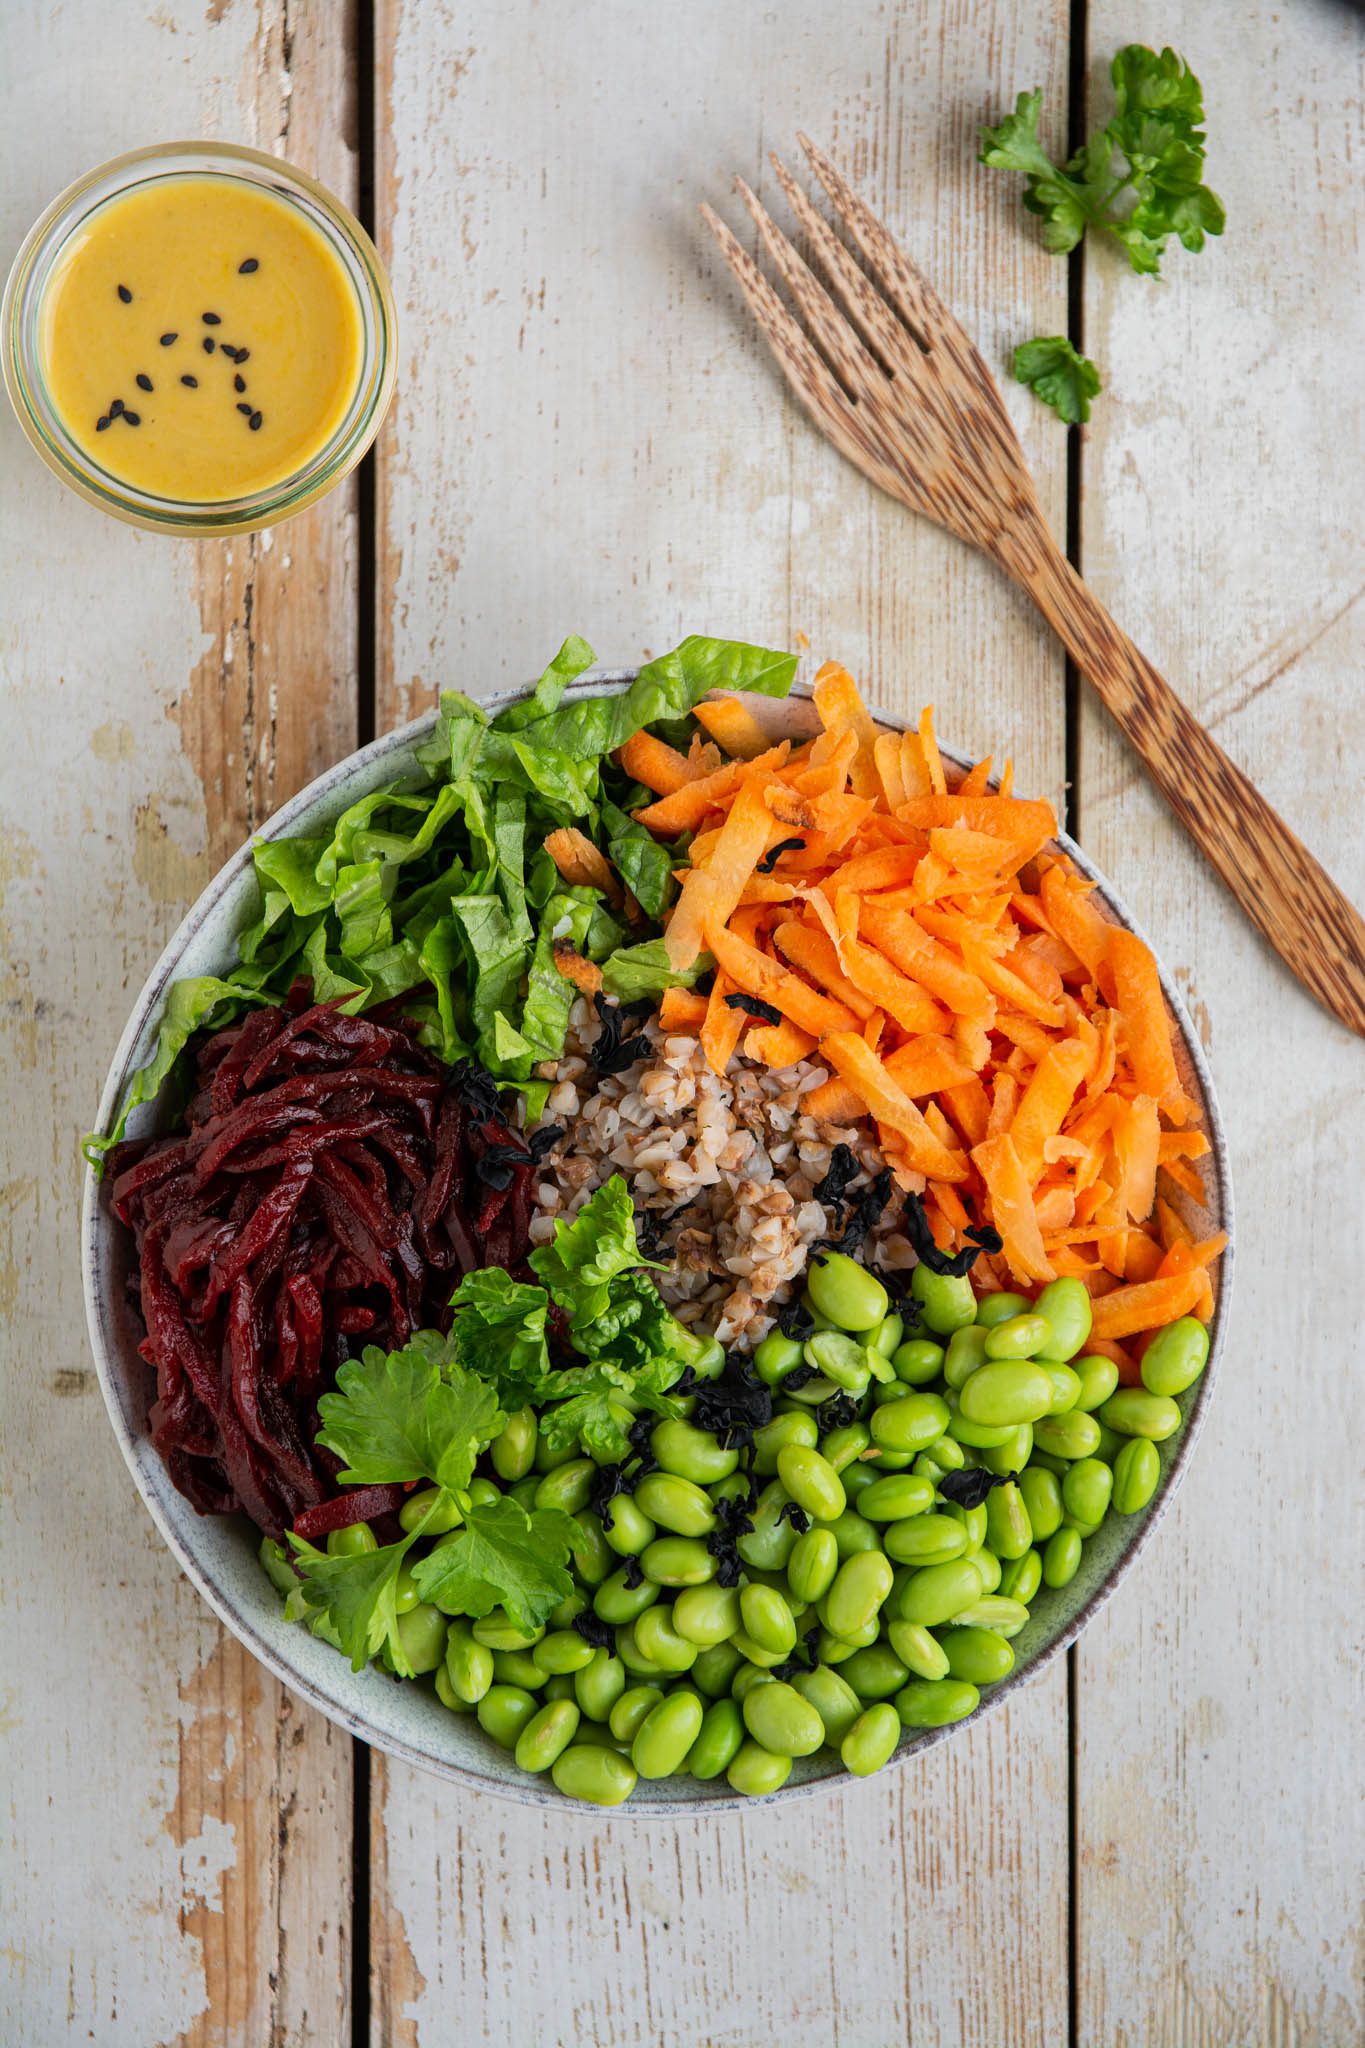 Learn how to make a filling balanced low glycemic vegan Buddha bowl with buckwheat, edamame beans, carrot, beetroot, and lettuce. And pour it over with a delicious oil-free salad dressing. 